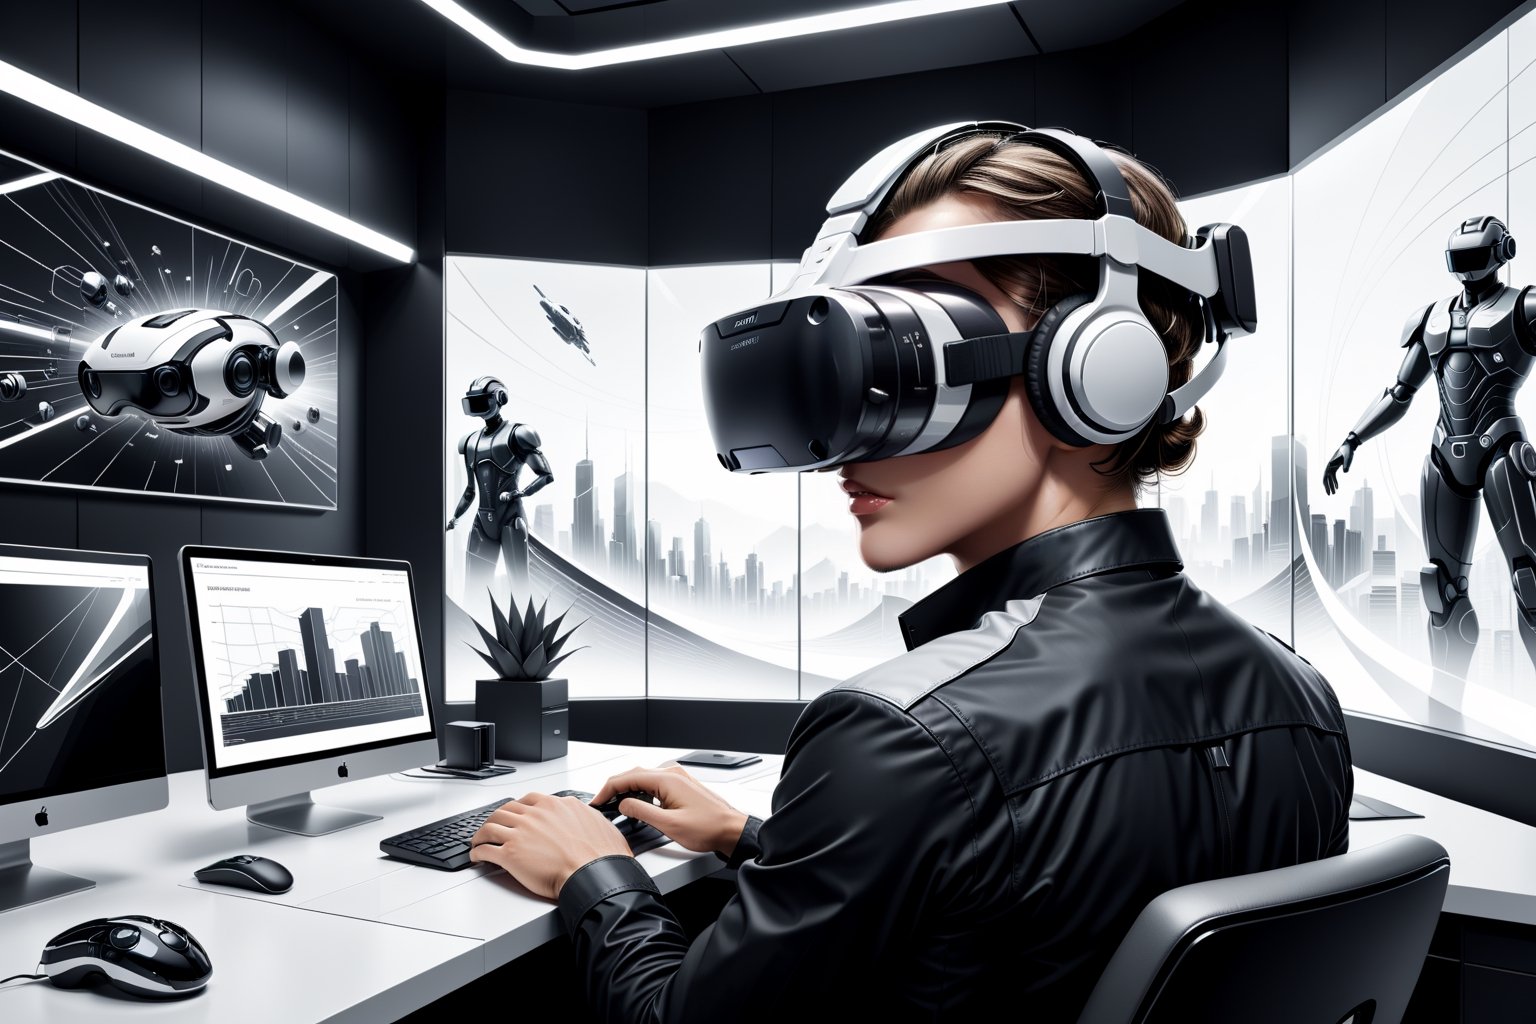 Visualize an unforgettable illustration drawn in a (((line art, monochrome))) style evoking a futuristic office setting. The focal point is a precise close-up of a modern worker wearing a (((VR headset))), embodying a mix of concentration and wonder. The scene is characterized by clean, simple lines and efficient patterns, reflecting a sense of modernity and advanced technology. The worker's attire and the surroundings are elegantly drawn in (monochrome) tones with subtle shading variations, bringing a sense of depth and complexity to the composition. Futuristic digital devices and tools float around the scene, intricate details drawn using minimalist line art, adding an air of sophistication and advanced tech to the illustration